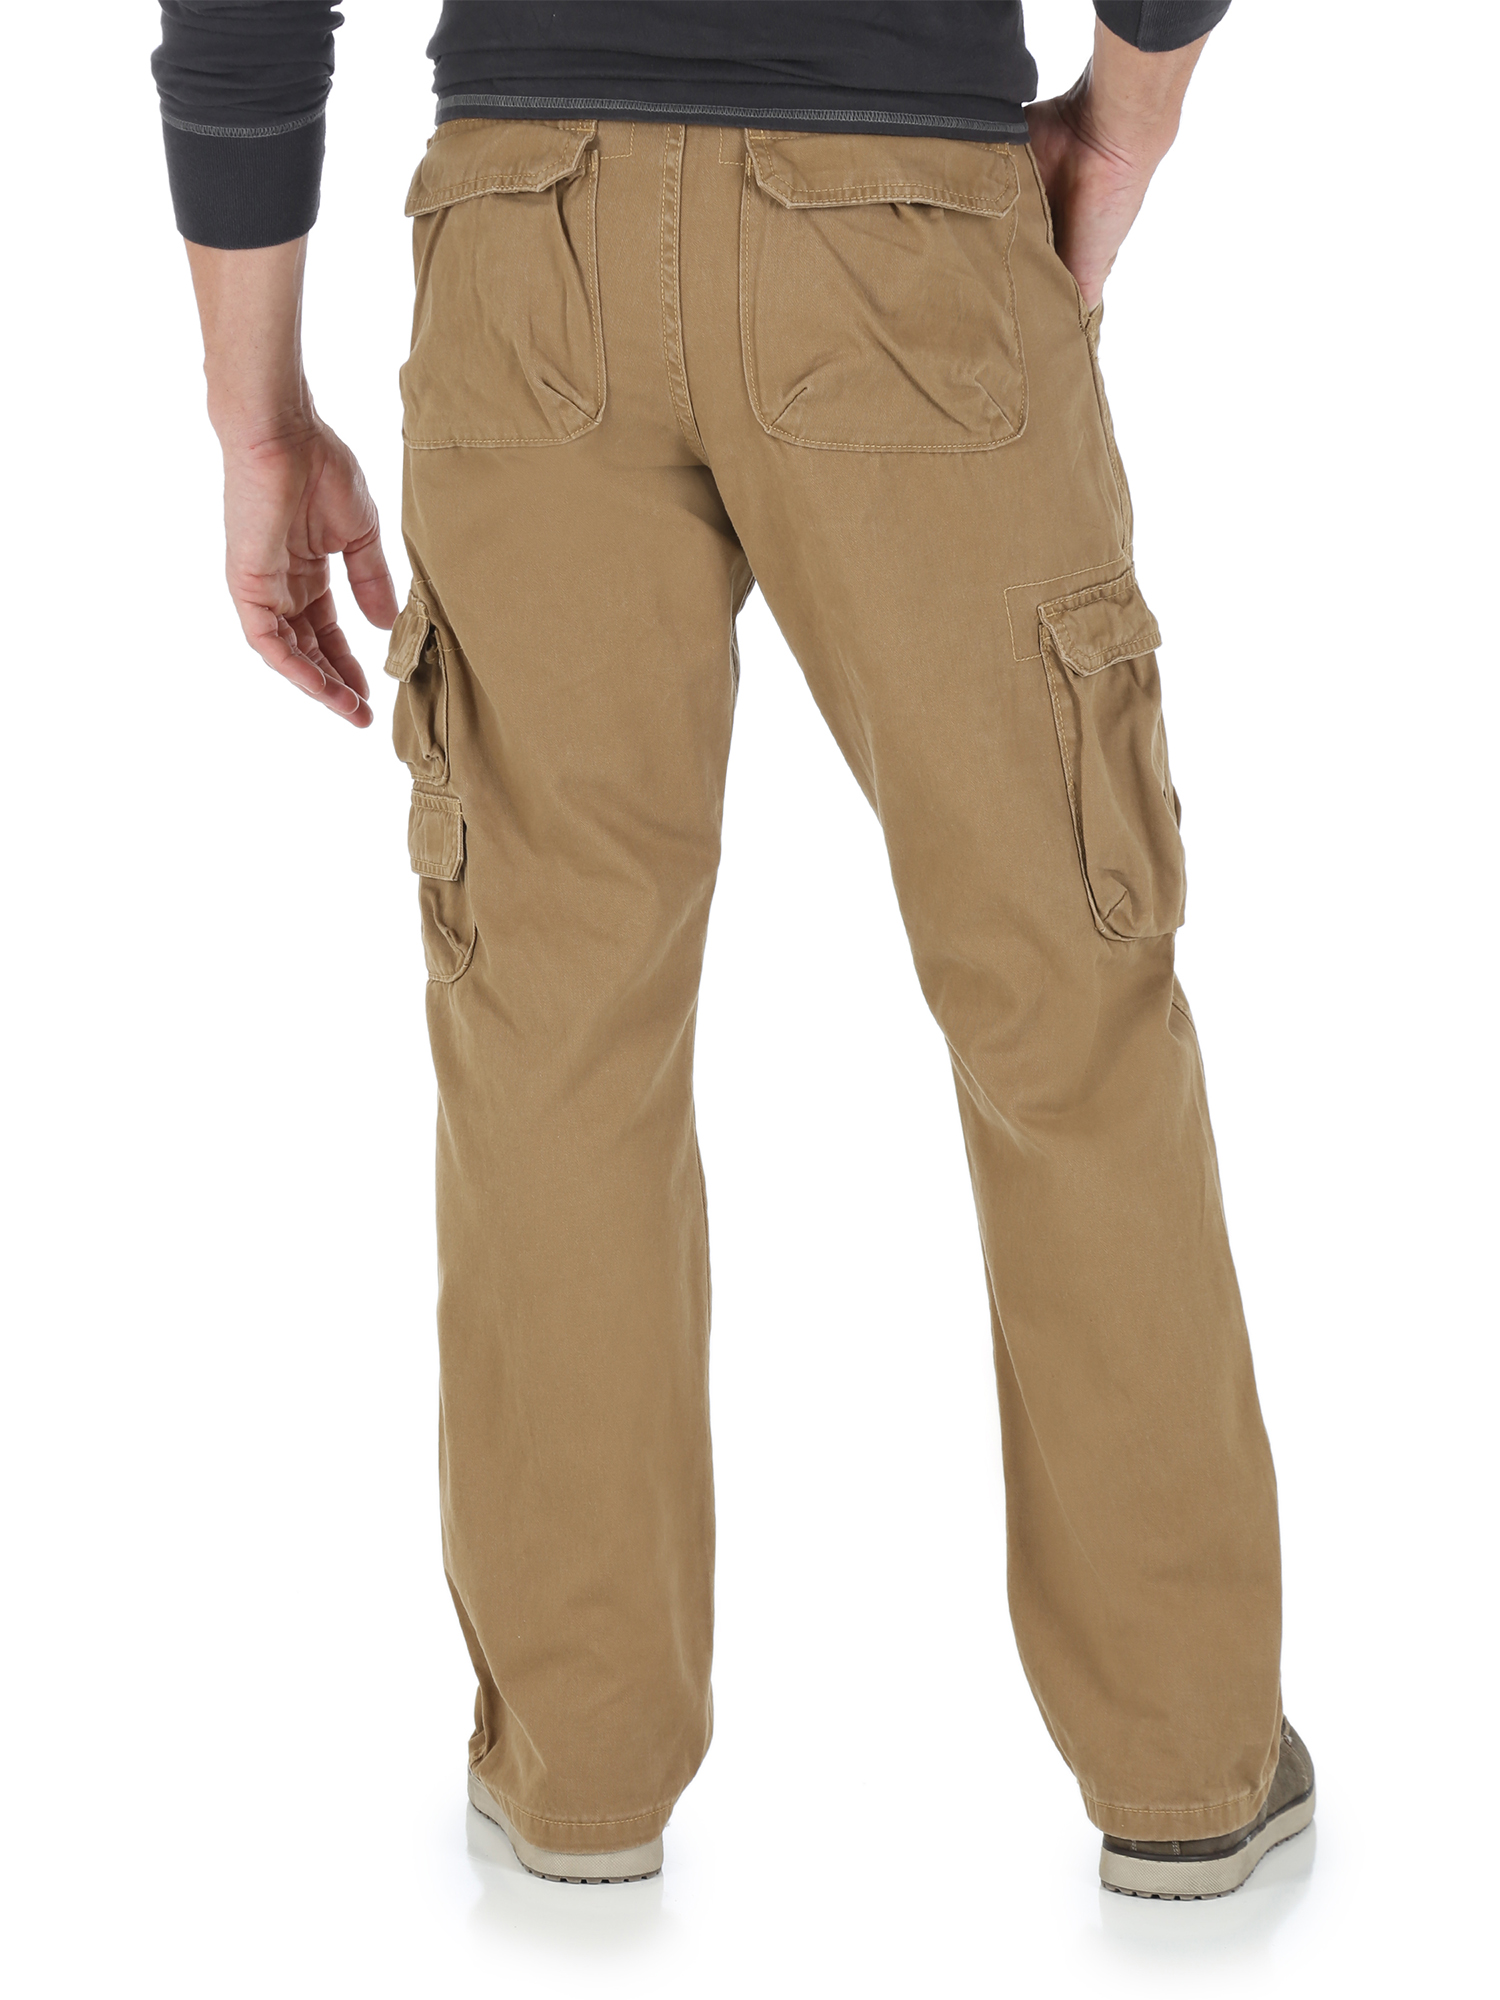 Men's Belted Twill Cargo Pant - image 2 of 2